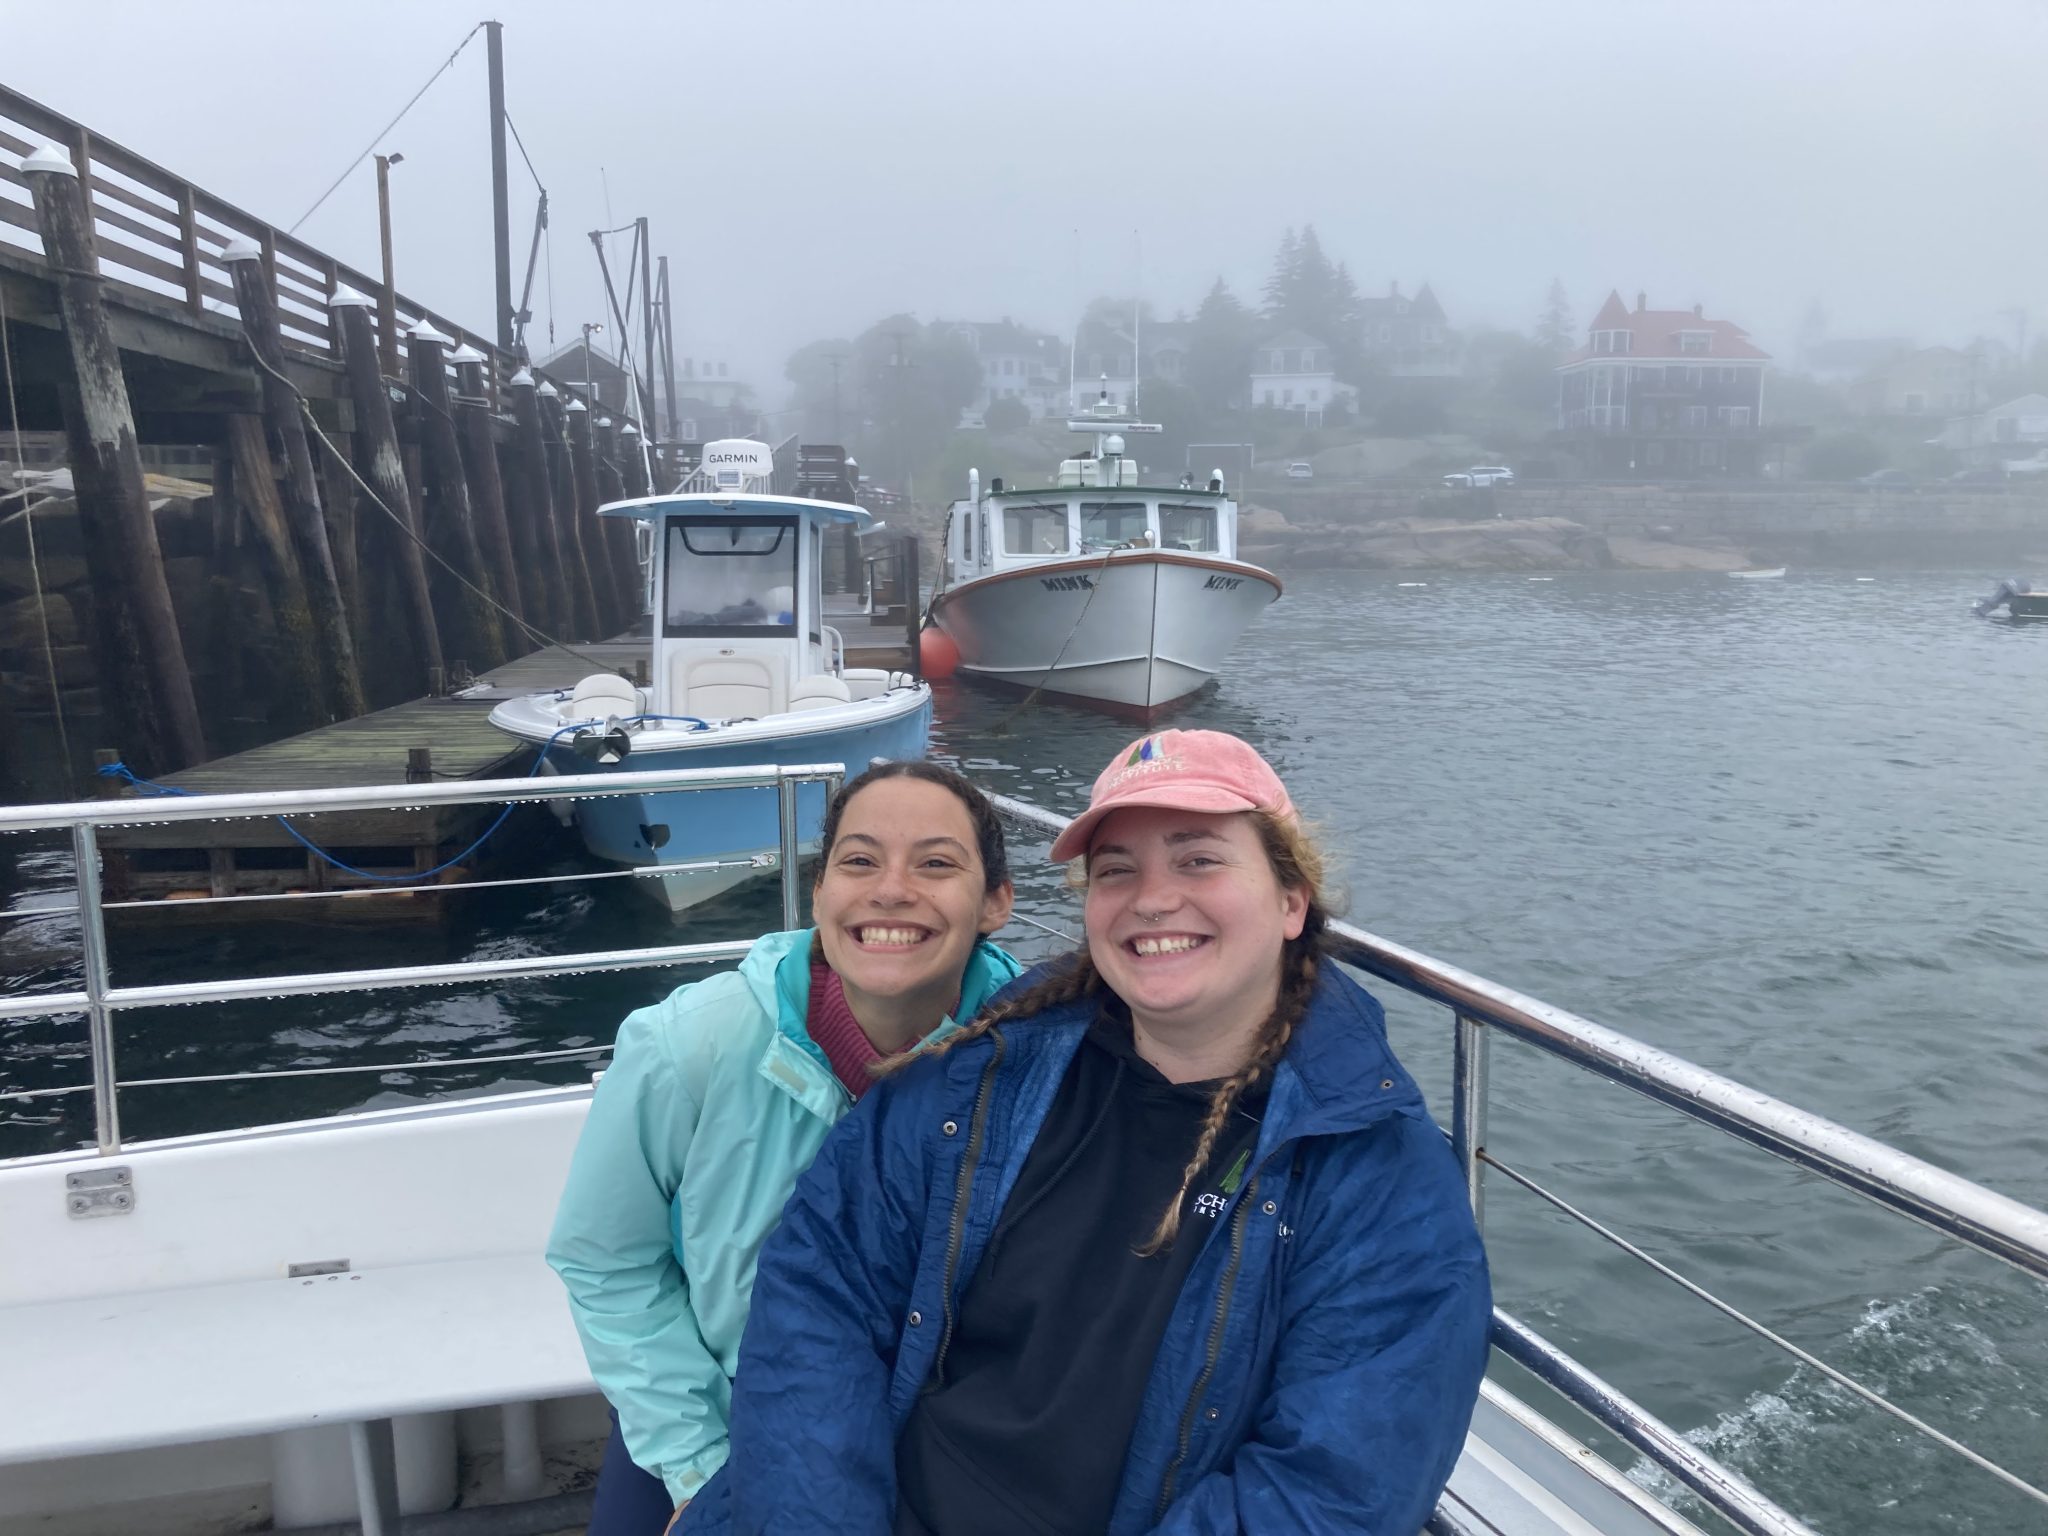 Two members of the forest and monitoring crew for Acadia National Park sit in a boat, smiling at the camera, in Stonington Harbor.